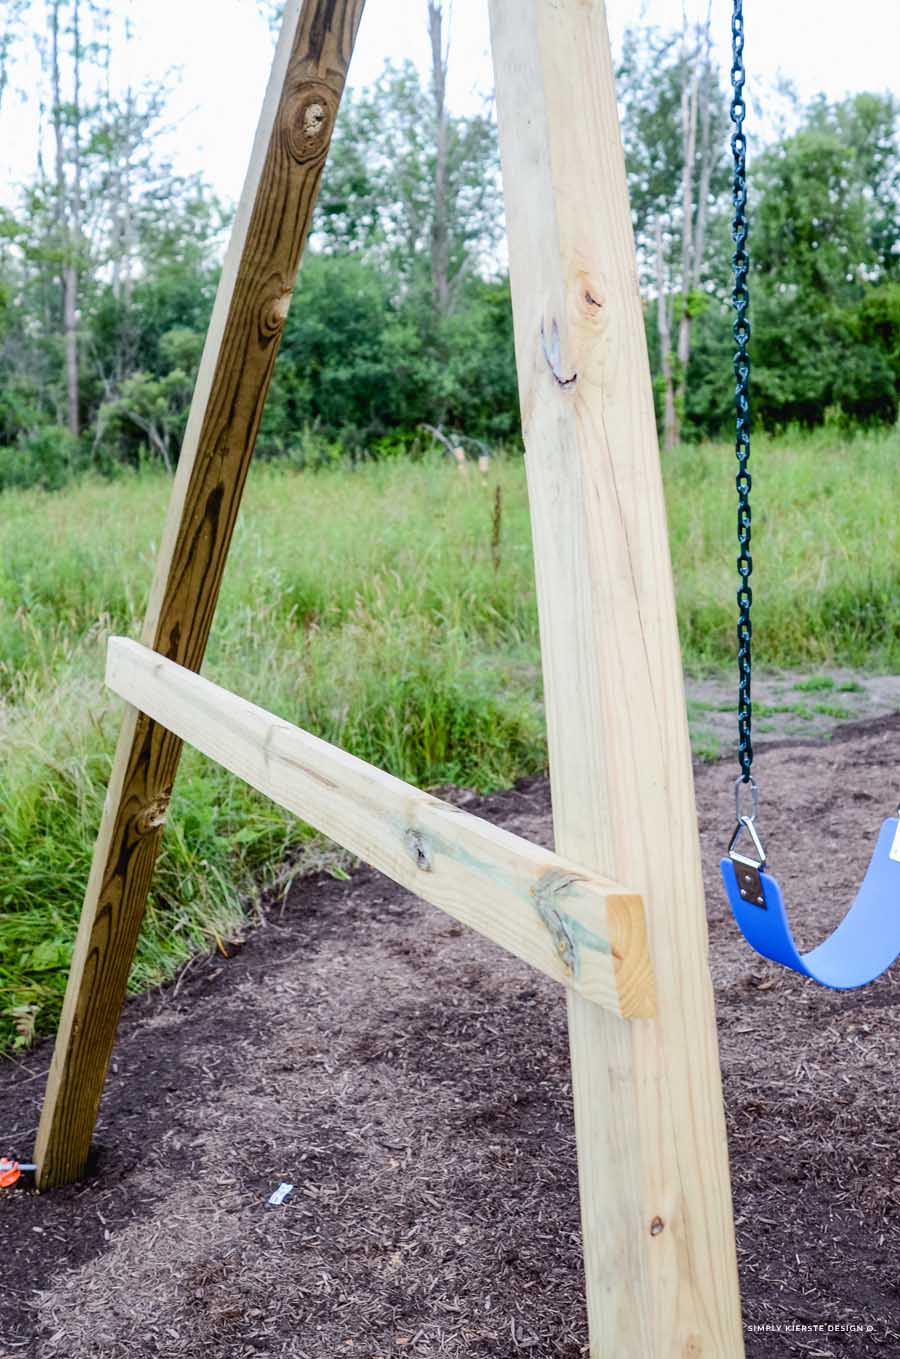 How to Build a Wooden Swing Set the EASY way!